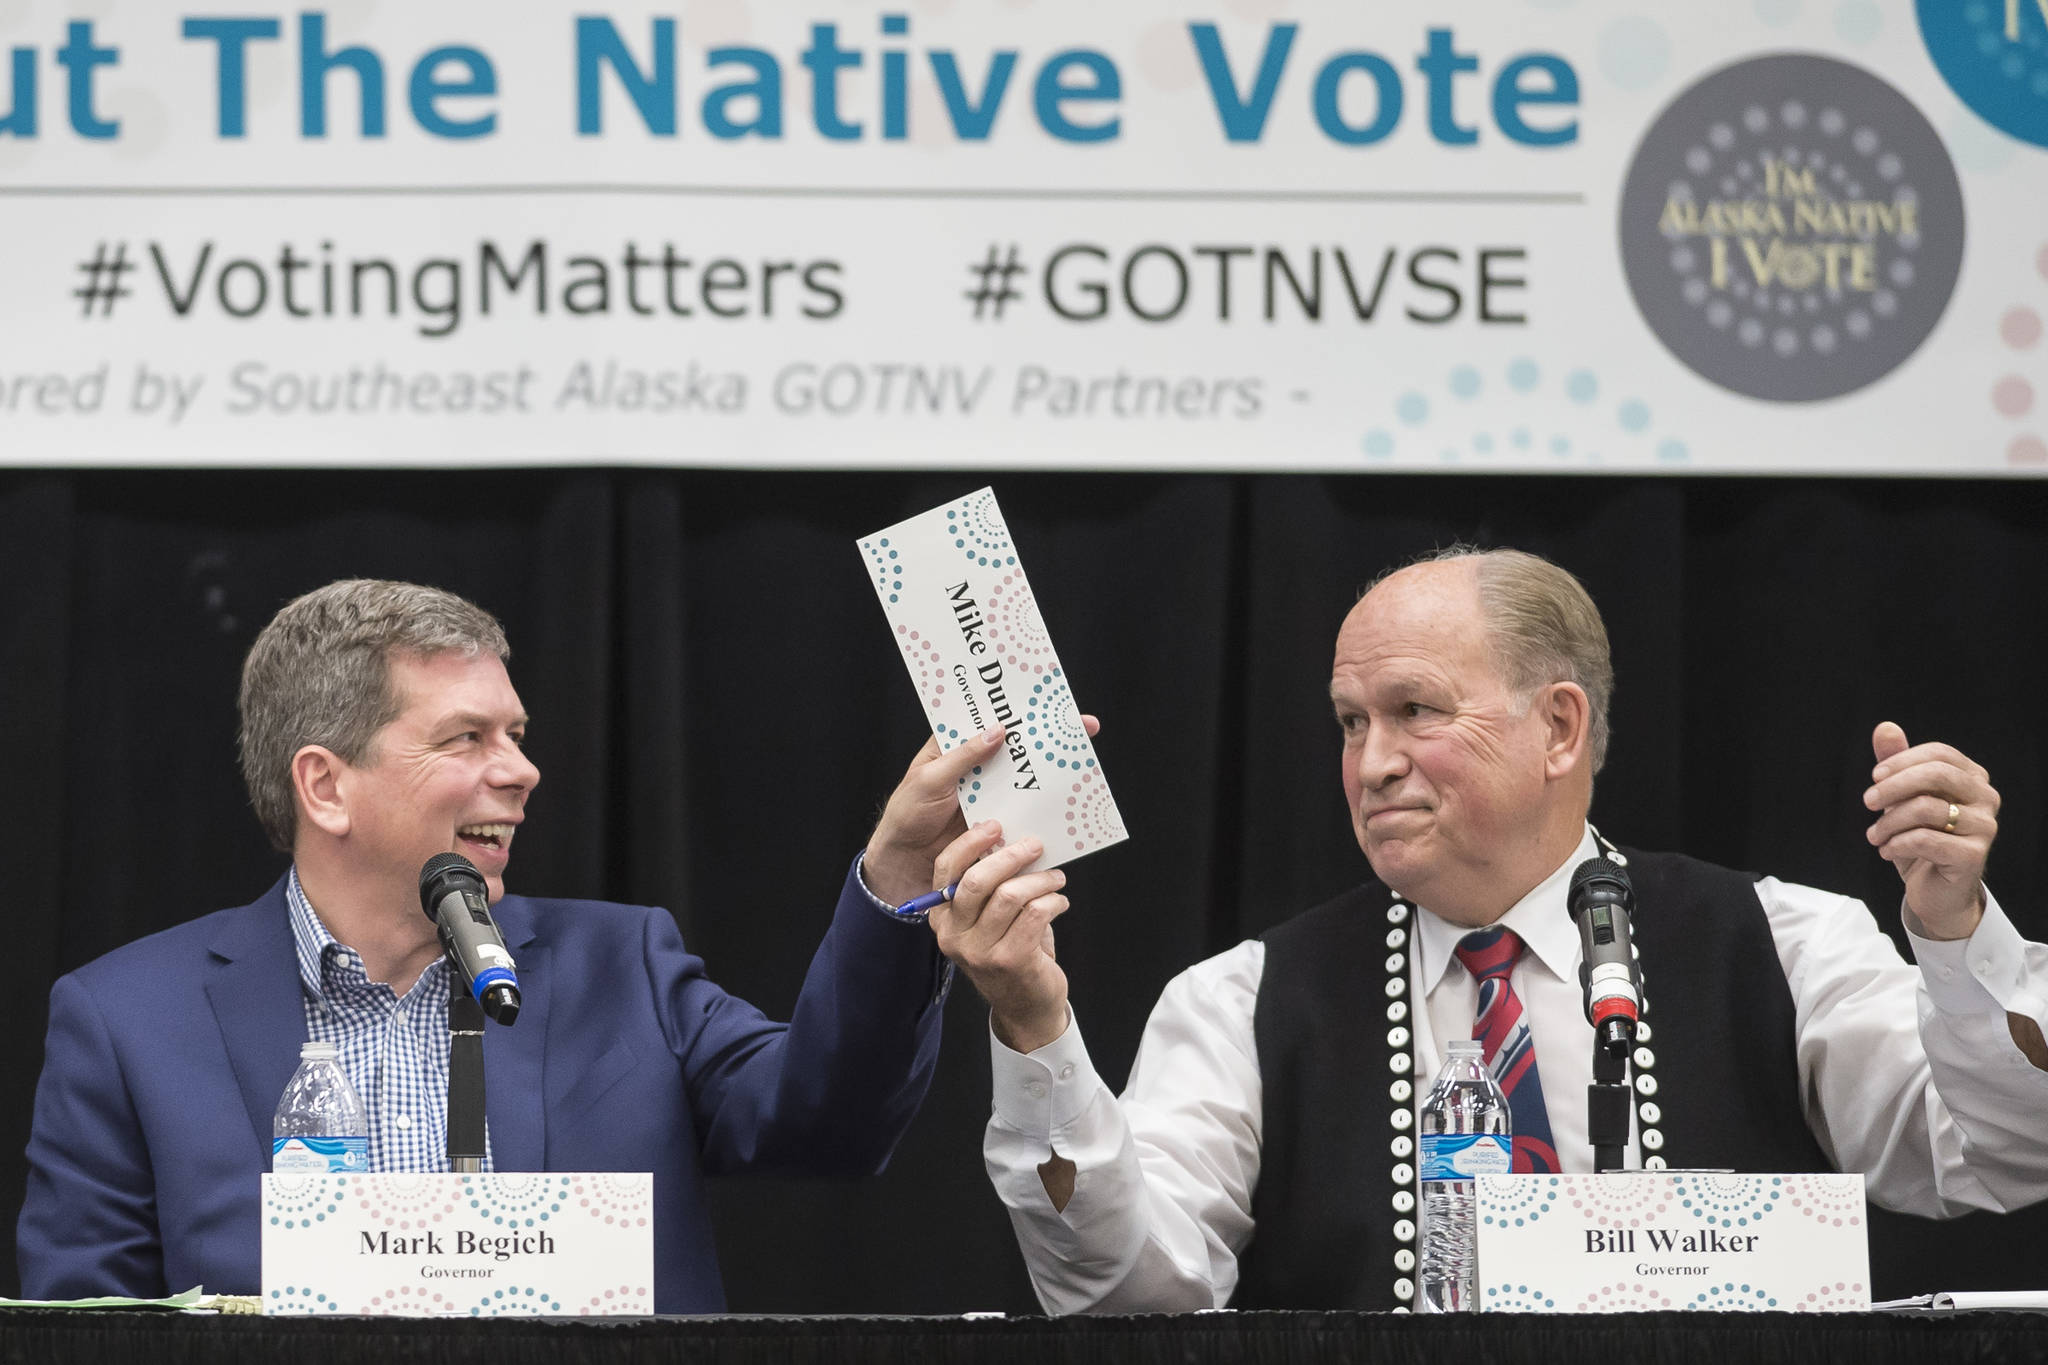 Former U.S. Sen. Mark Begich, left, and Gov. Bill Walker pass Mike Dunleavy’s name plate during a Special Native Issues Forum for governor candidates at the Elizabeth Peratrovich Hall on Tuesday, Oct. 2, 2018. Libertarian candidate Billy Toien, out of picture to the left, requested the name plate. Dunleavy did not attend the forum. (Michael Penn | Juneau Empire)